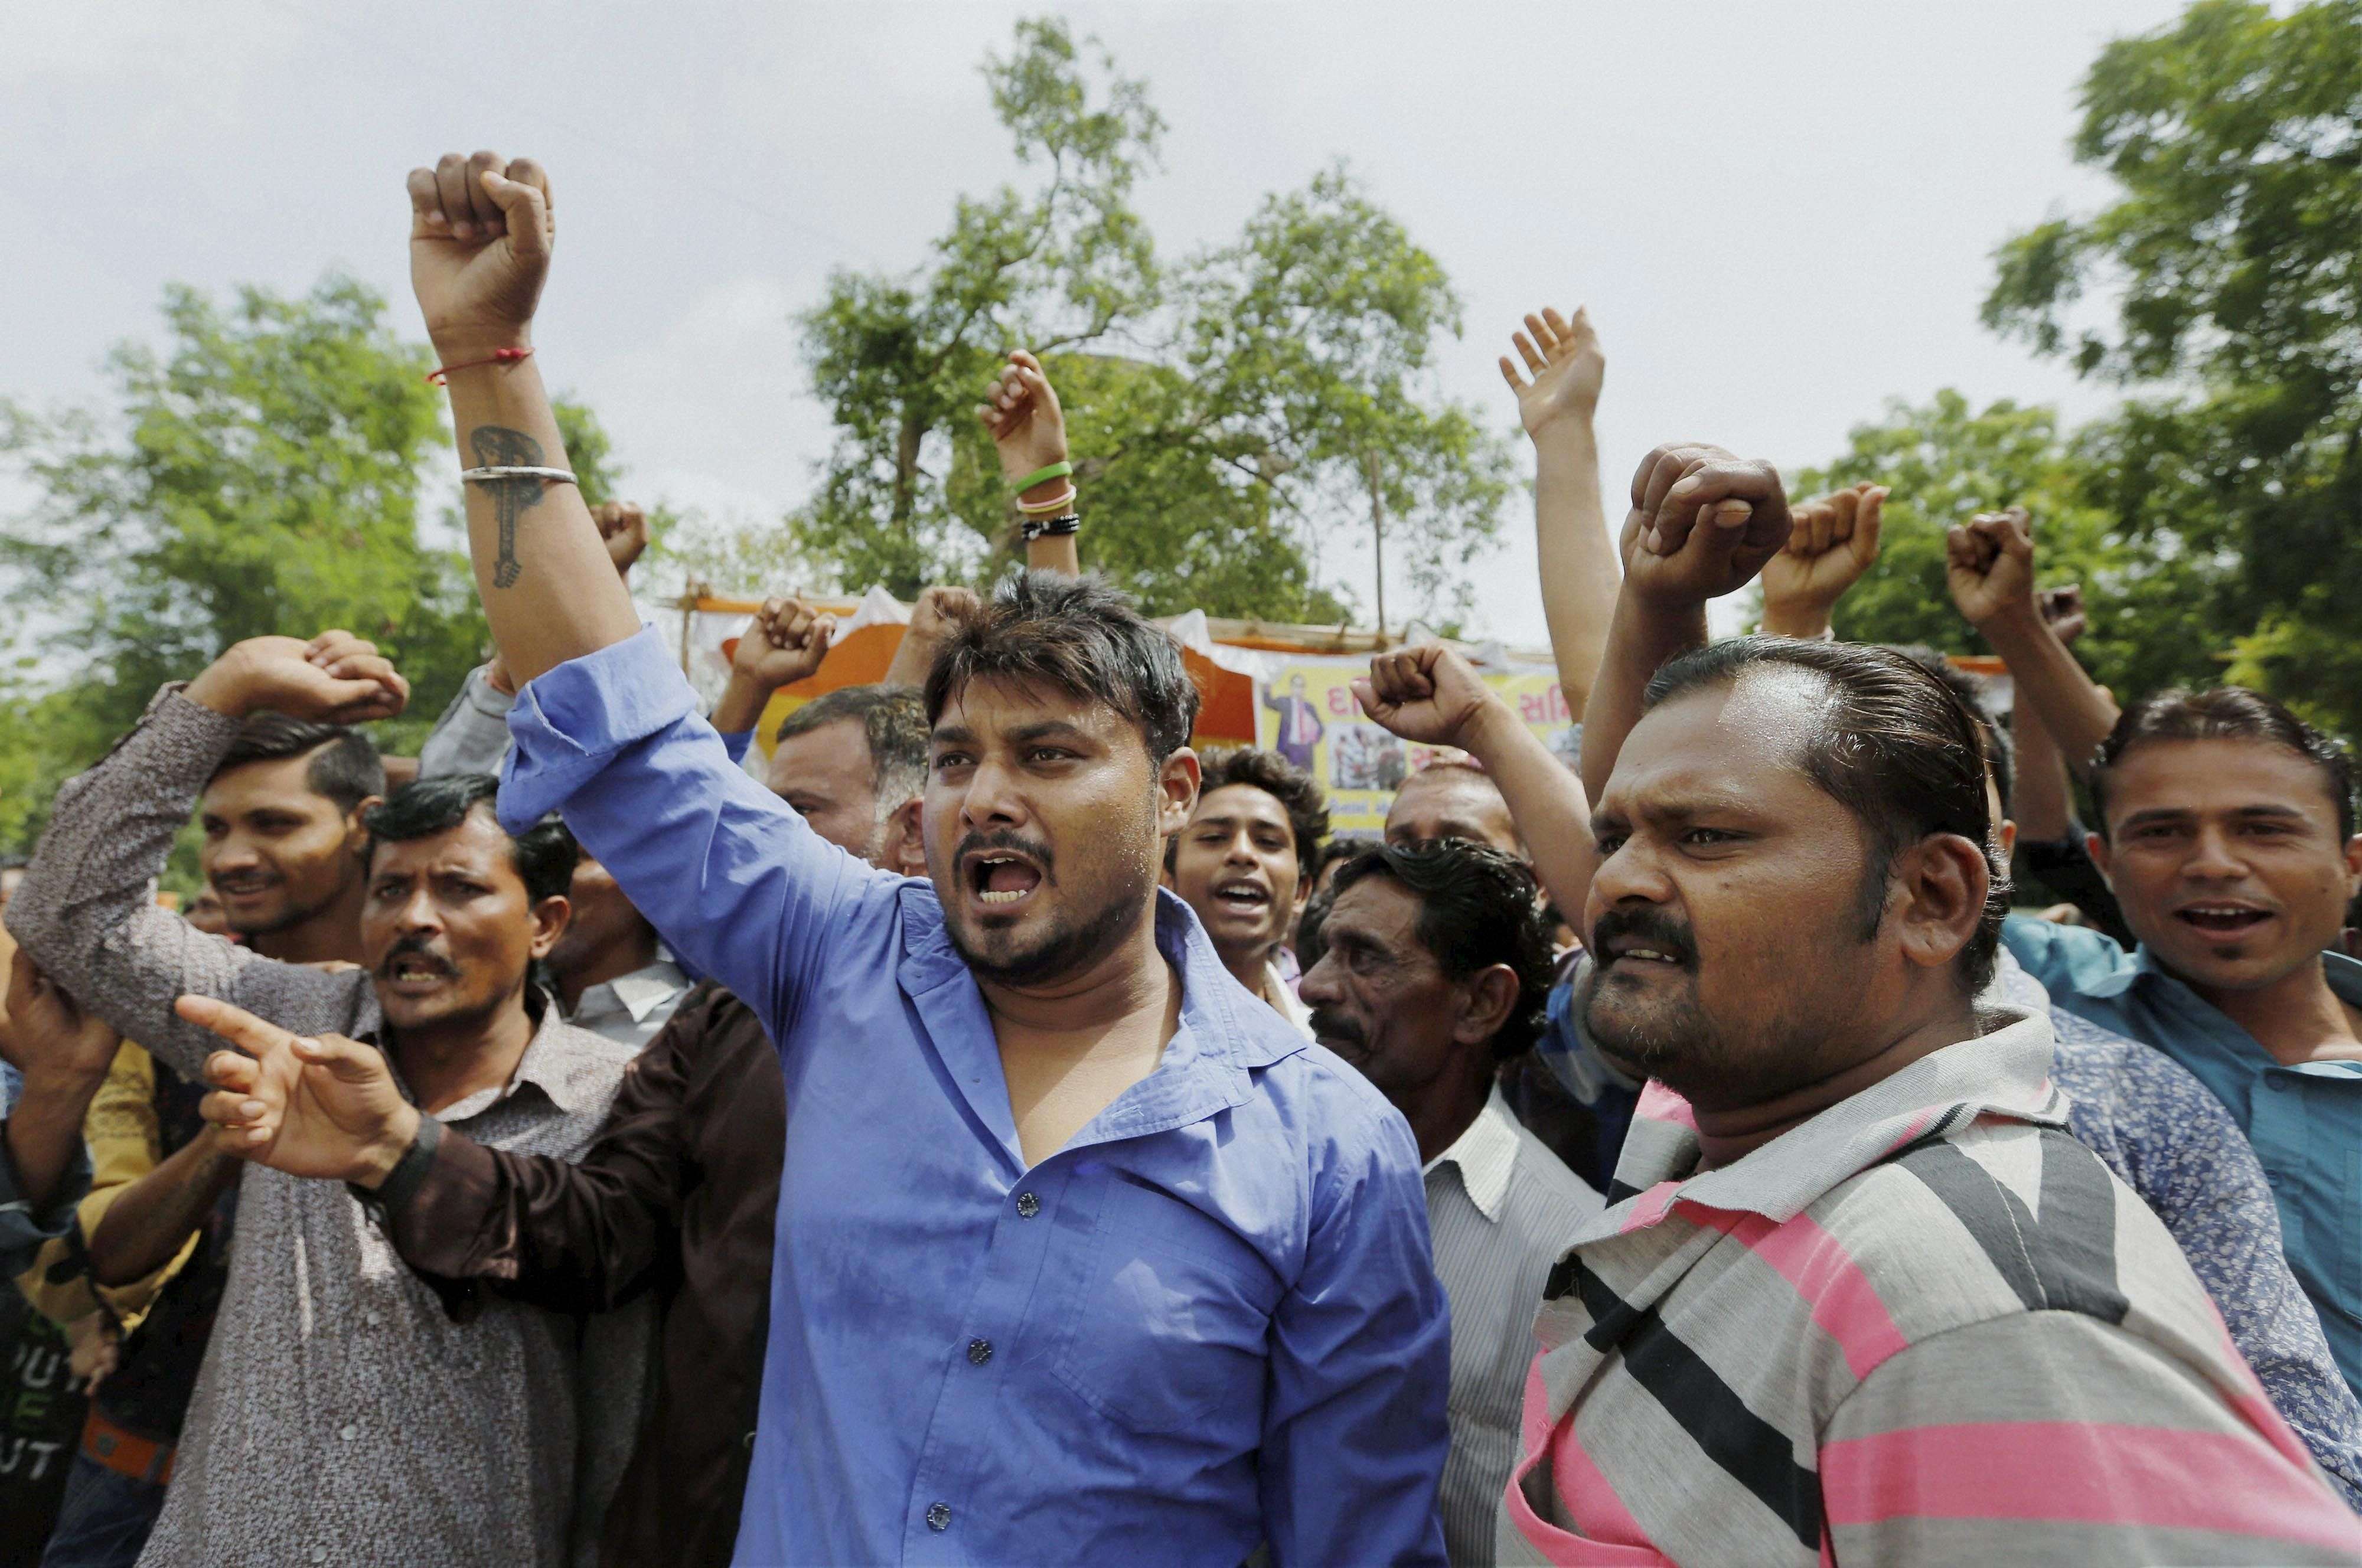 Ahmedabad: Dalit community members shout slogans during a protest in Ahmedabad on Friday against the recent attack on dalit members at Una, Rajkot. PTI Photo (PTI7_22_2016_000130A)